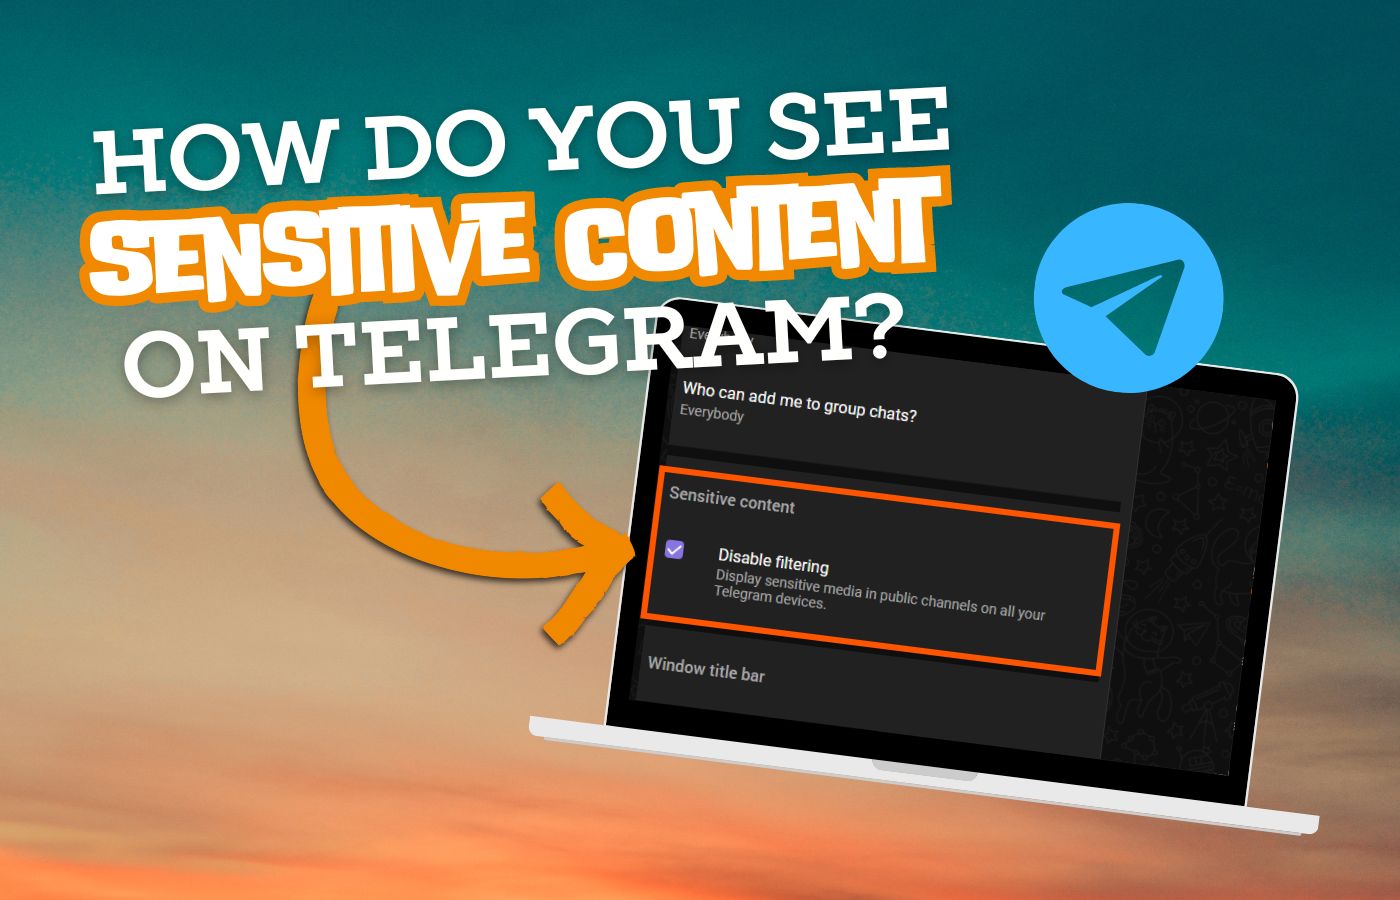 How Do You See Sensitive Content on Telegram?